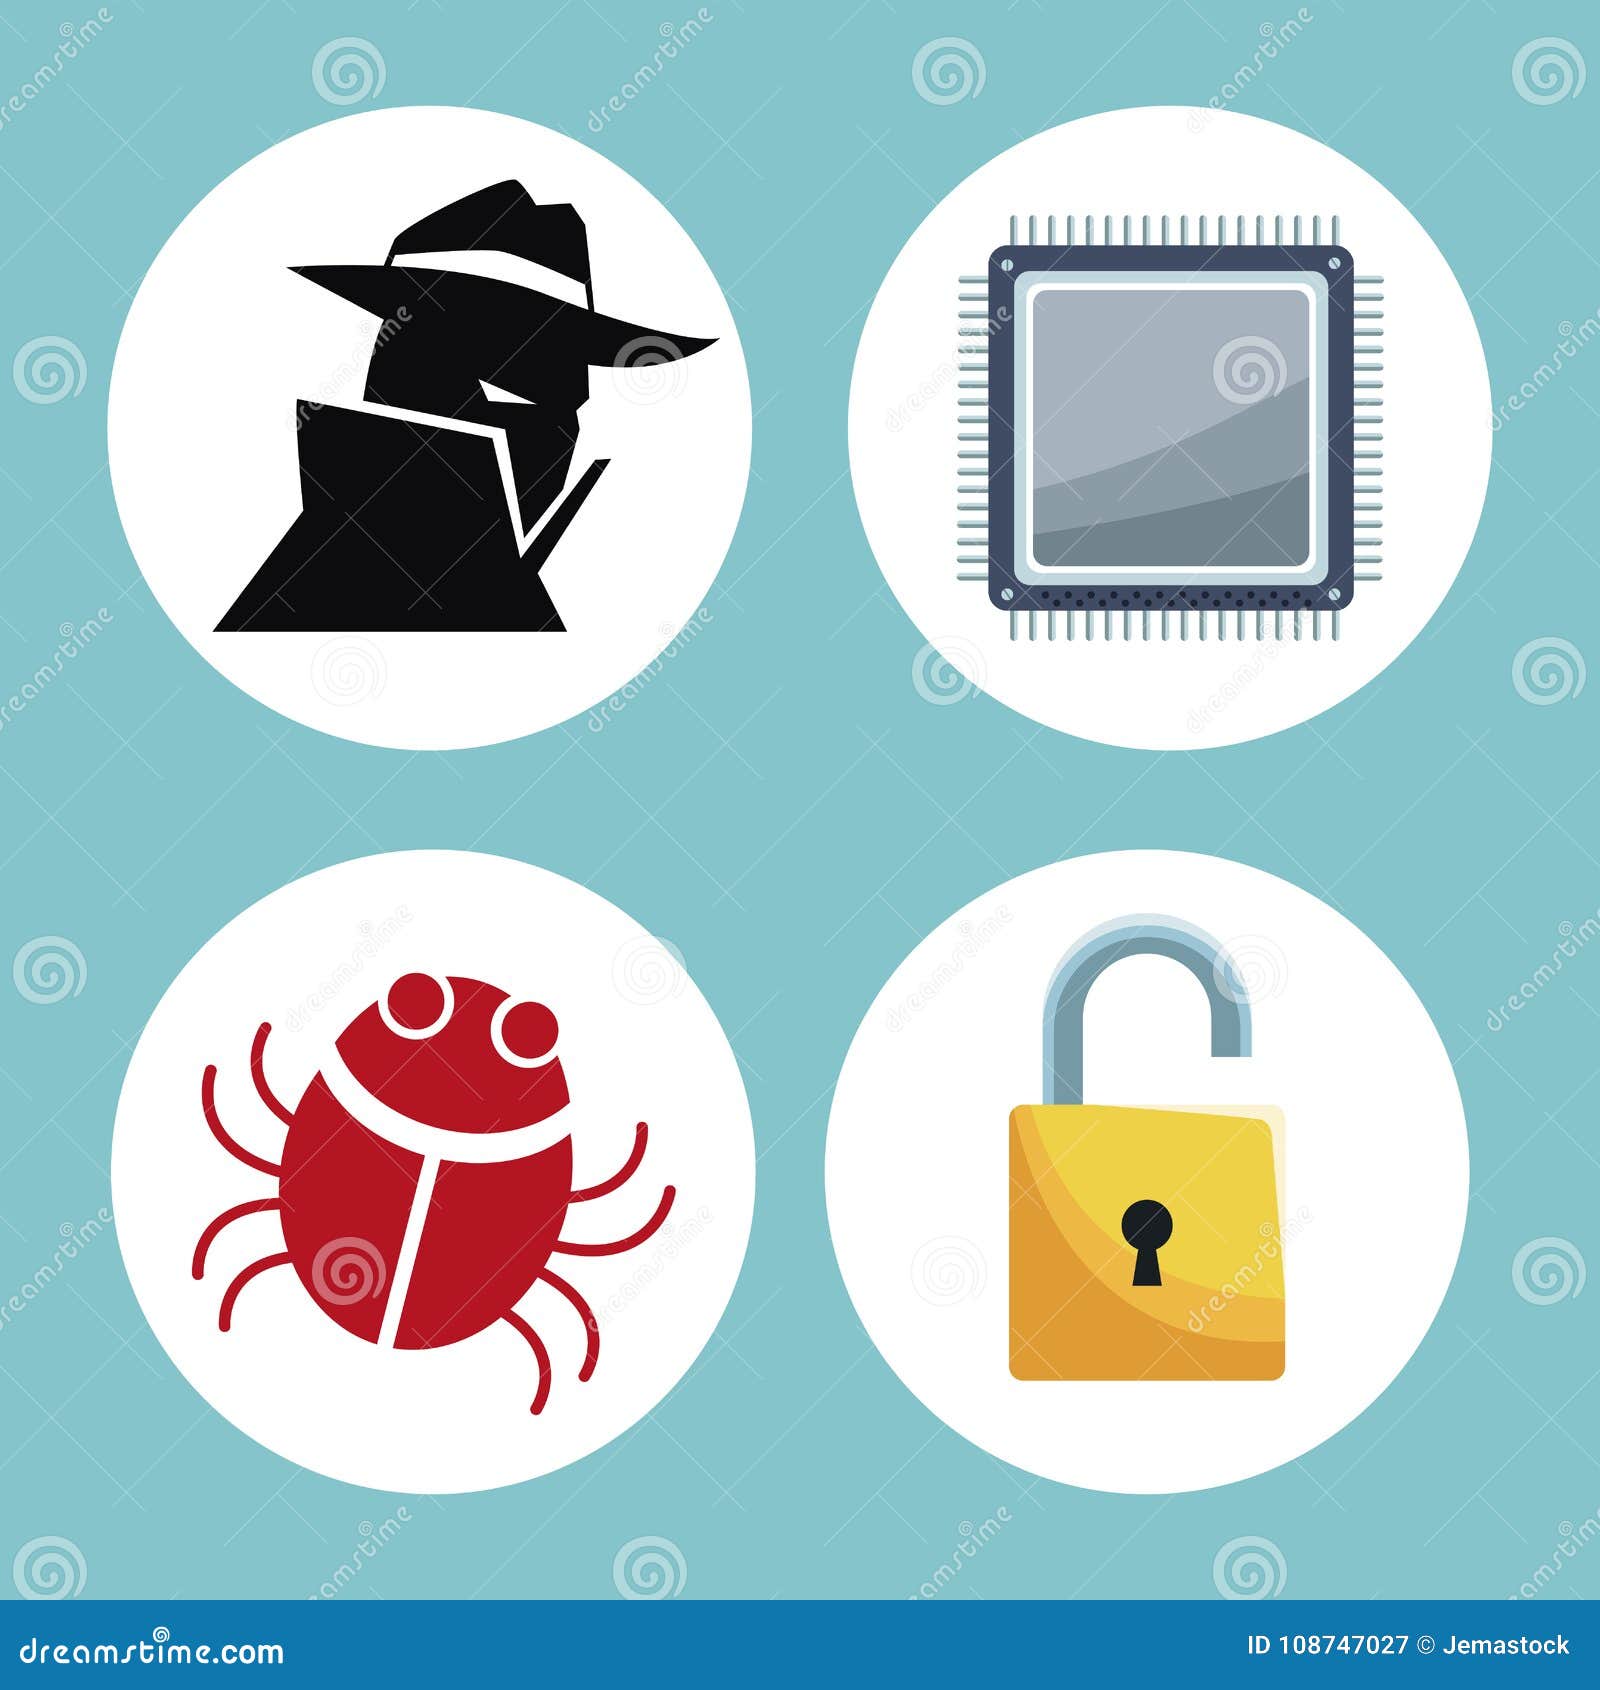 cyber security icons